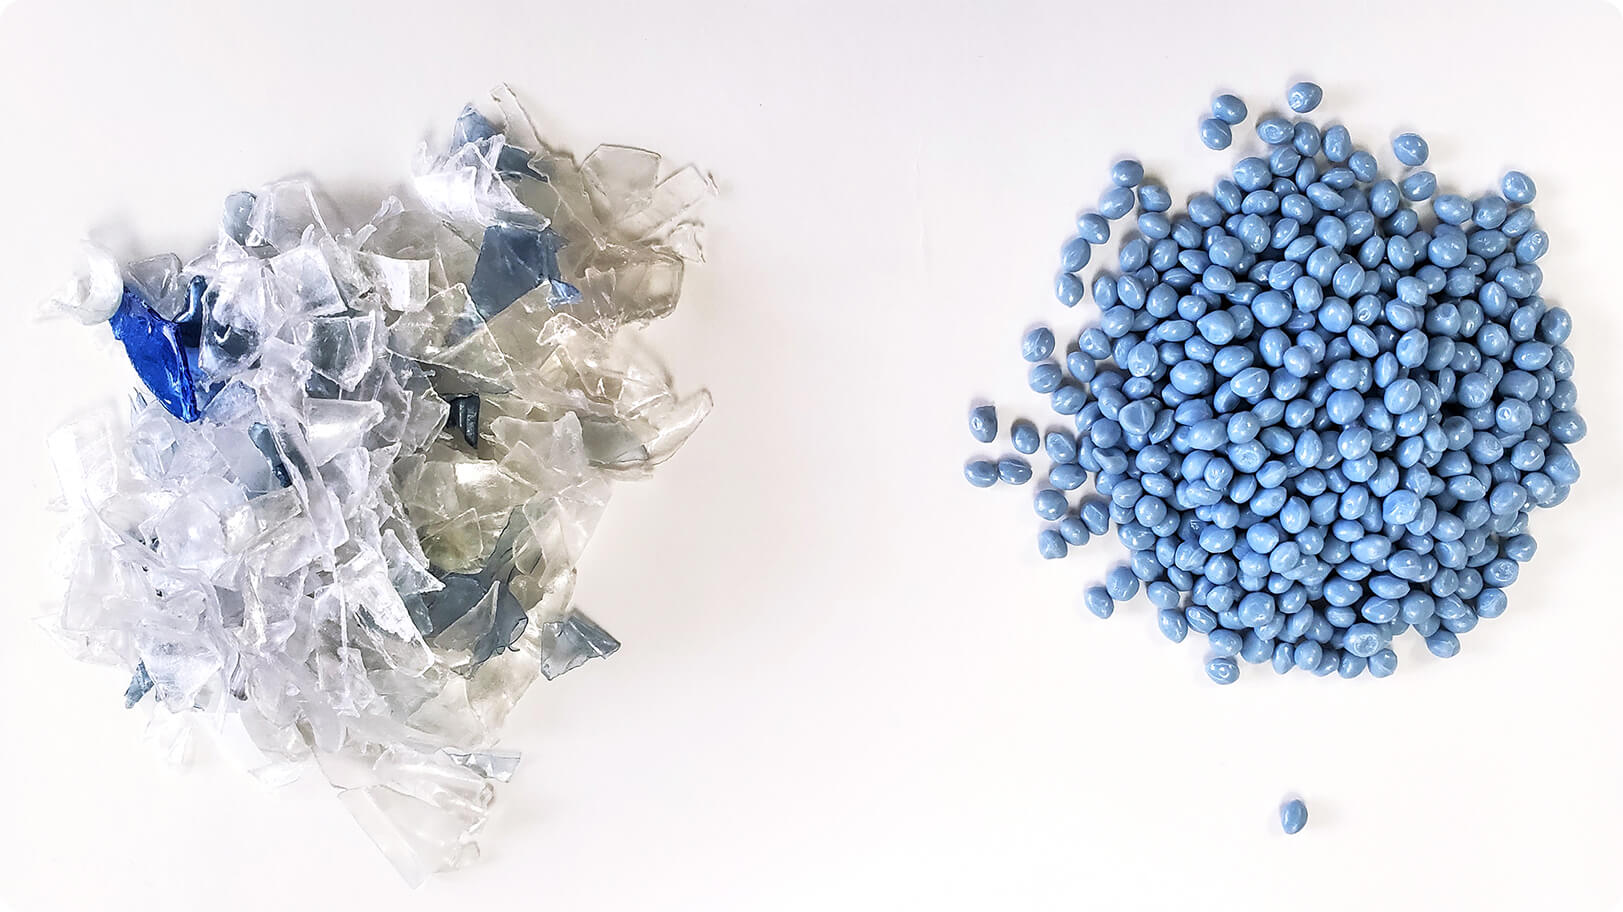 Recycled plastic in 2 forms. Blue pellets and flakes